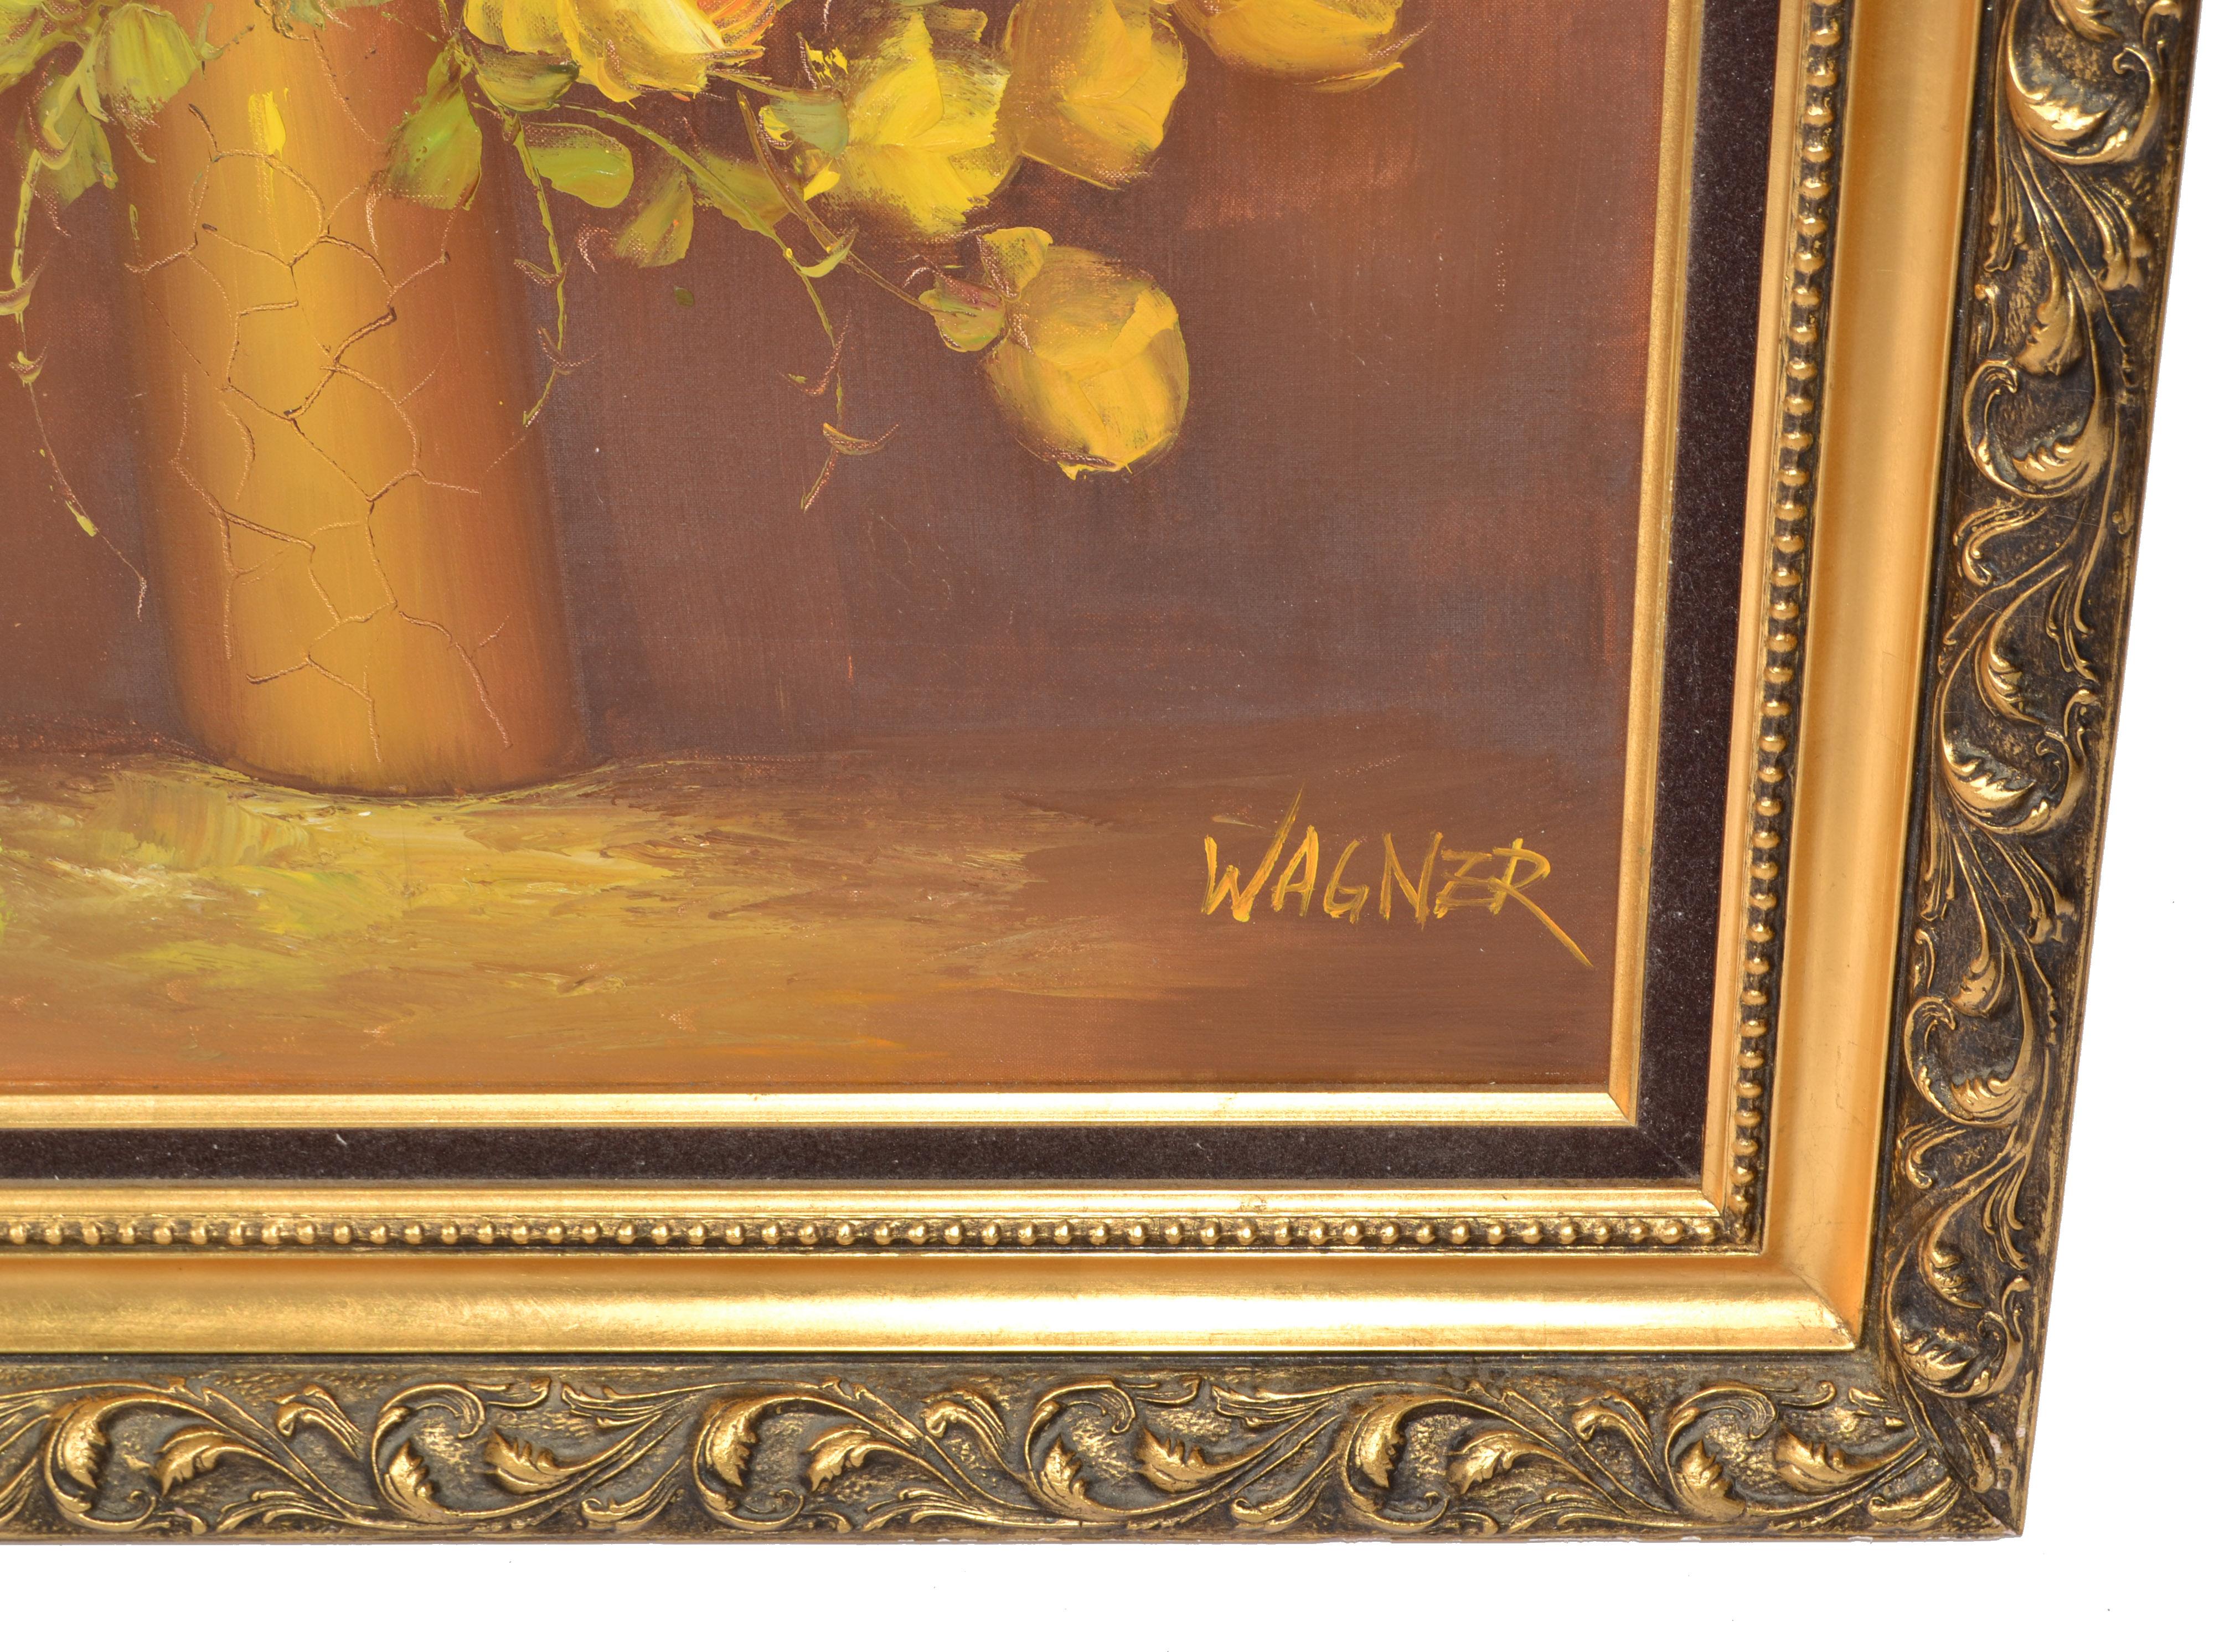 F. Wagner Framed Classical Floral Still Life Roses Painting Oil on Canvas, 1972 For Sale 1